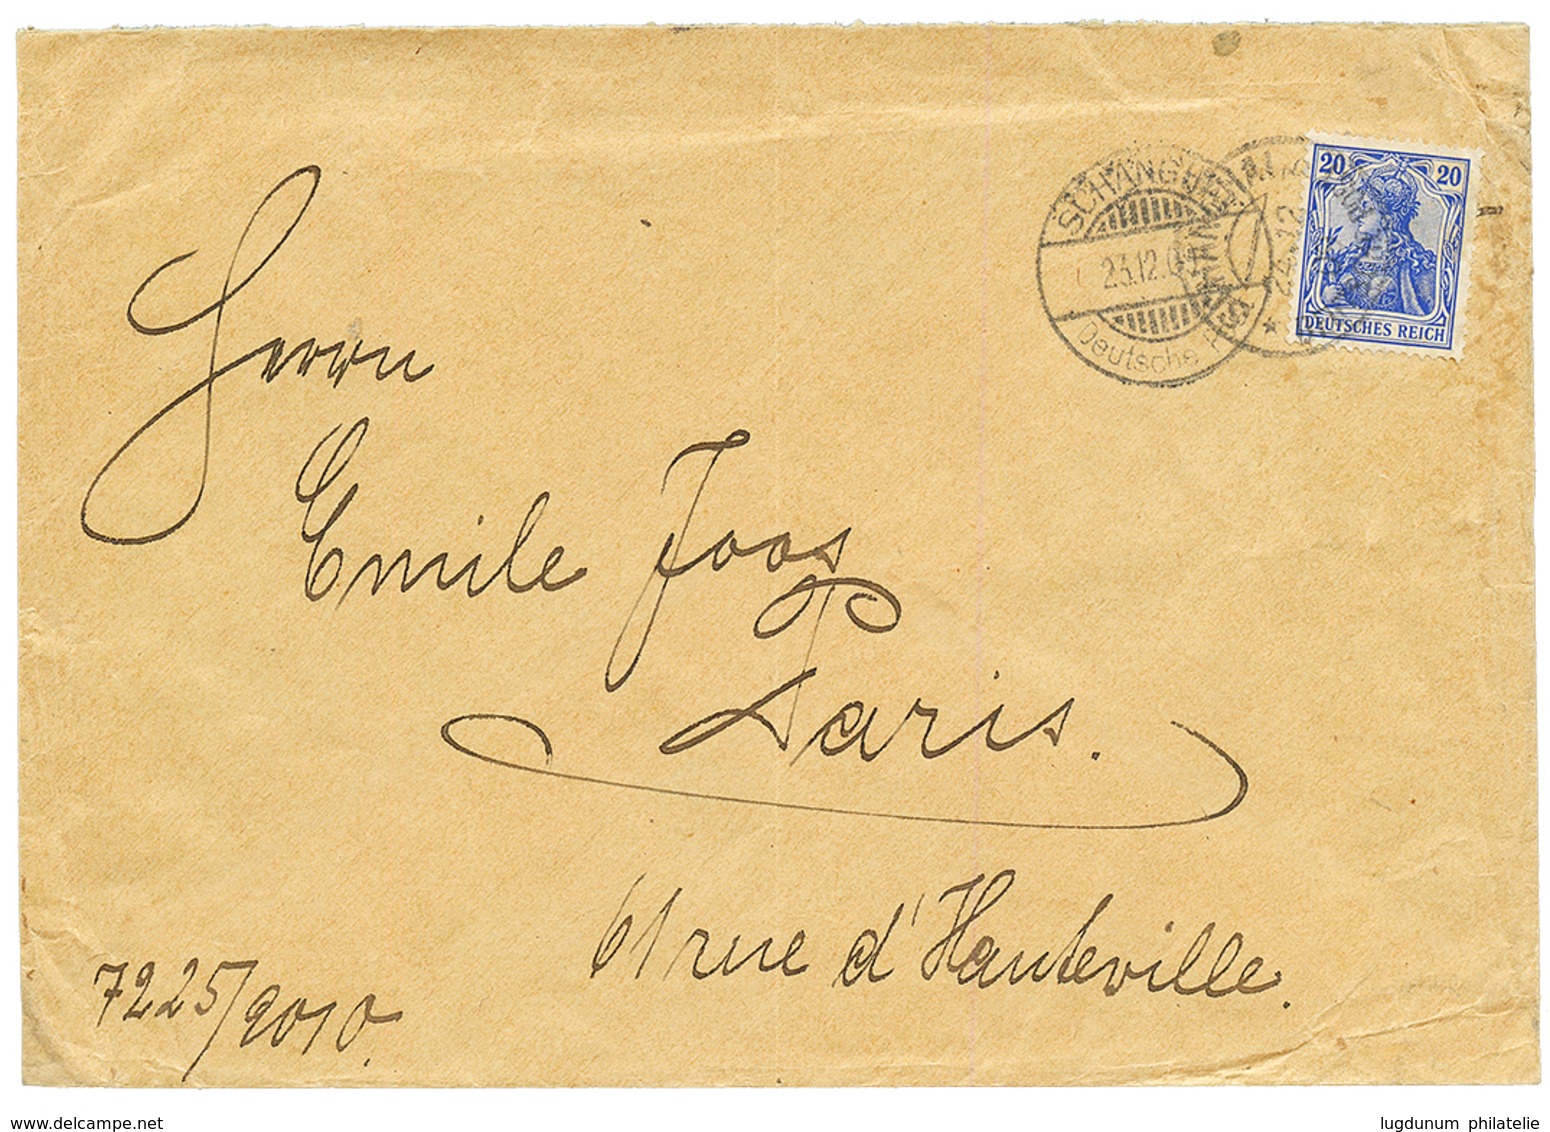 CHINA - BOXER Rebellion : 1900 GERMANY 20pf(PVd) Canc. SHANGHAI DP + SHANGHAI A On Envelope To FRANCE. Vf. - Deutsche Post In China